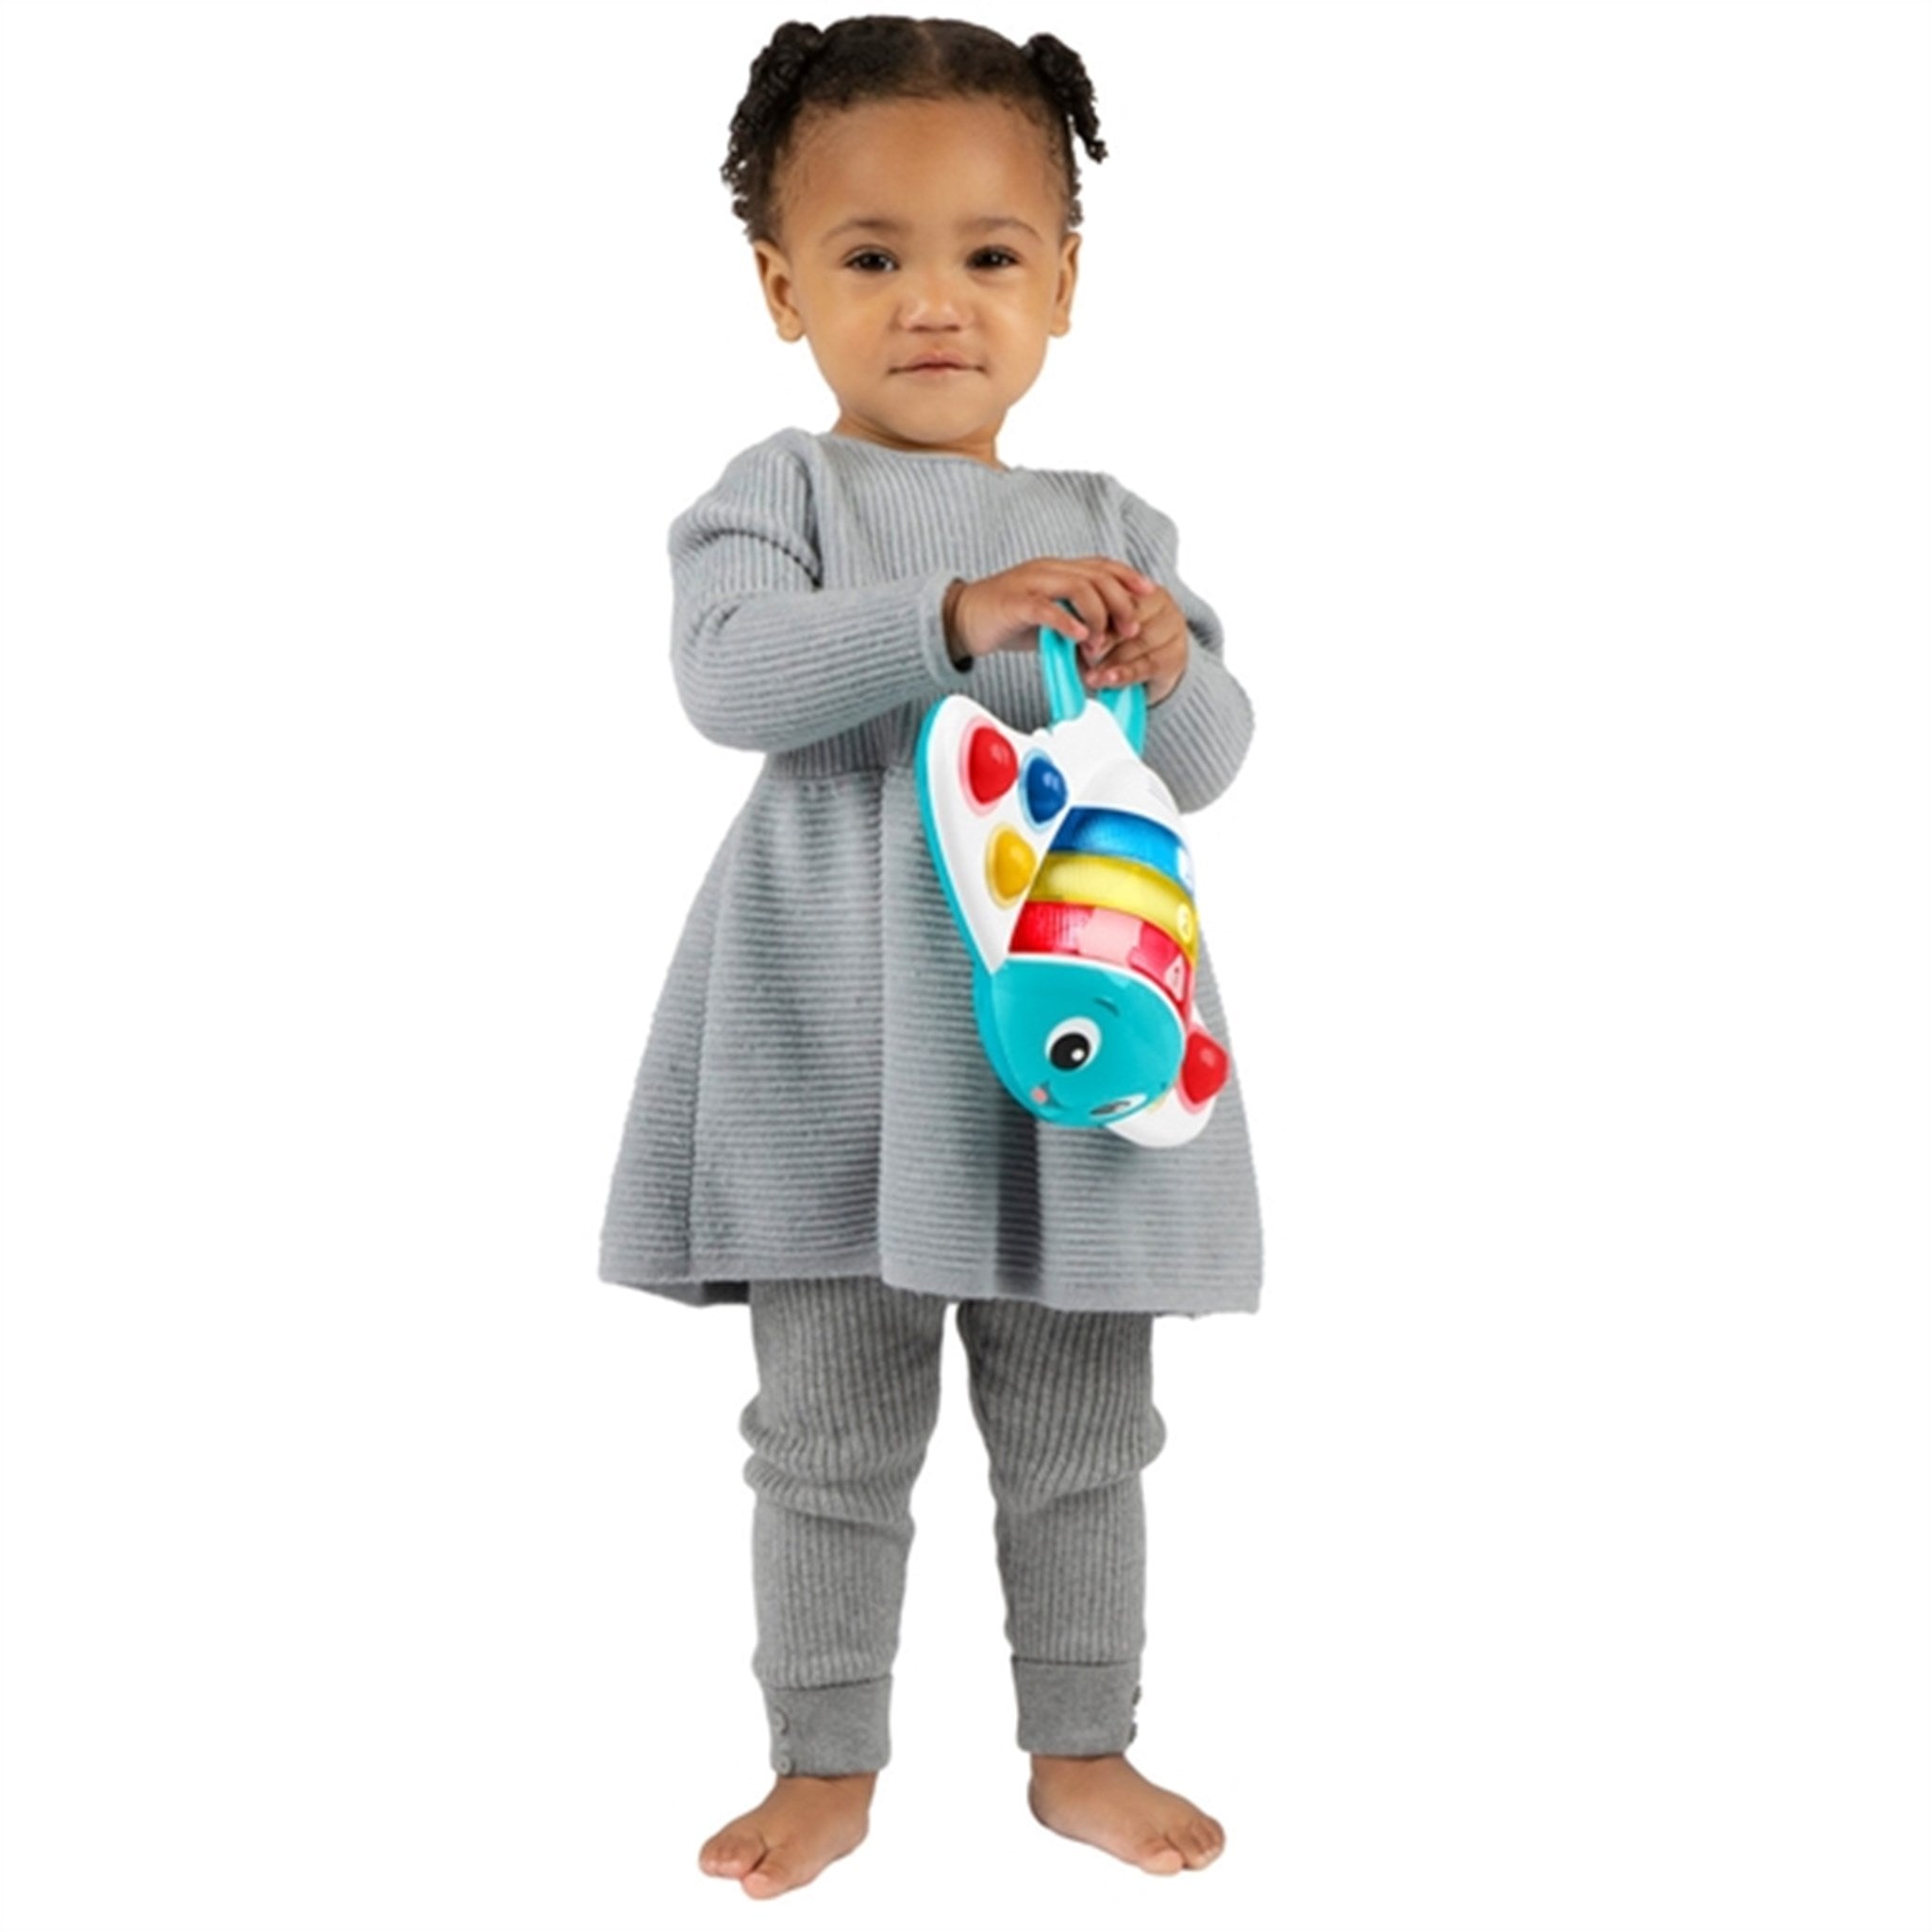 Baby Einstein Play Stingray Dimple and Delight 2